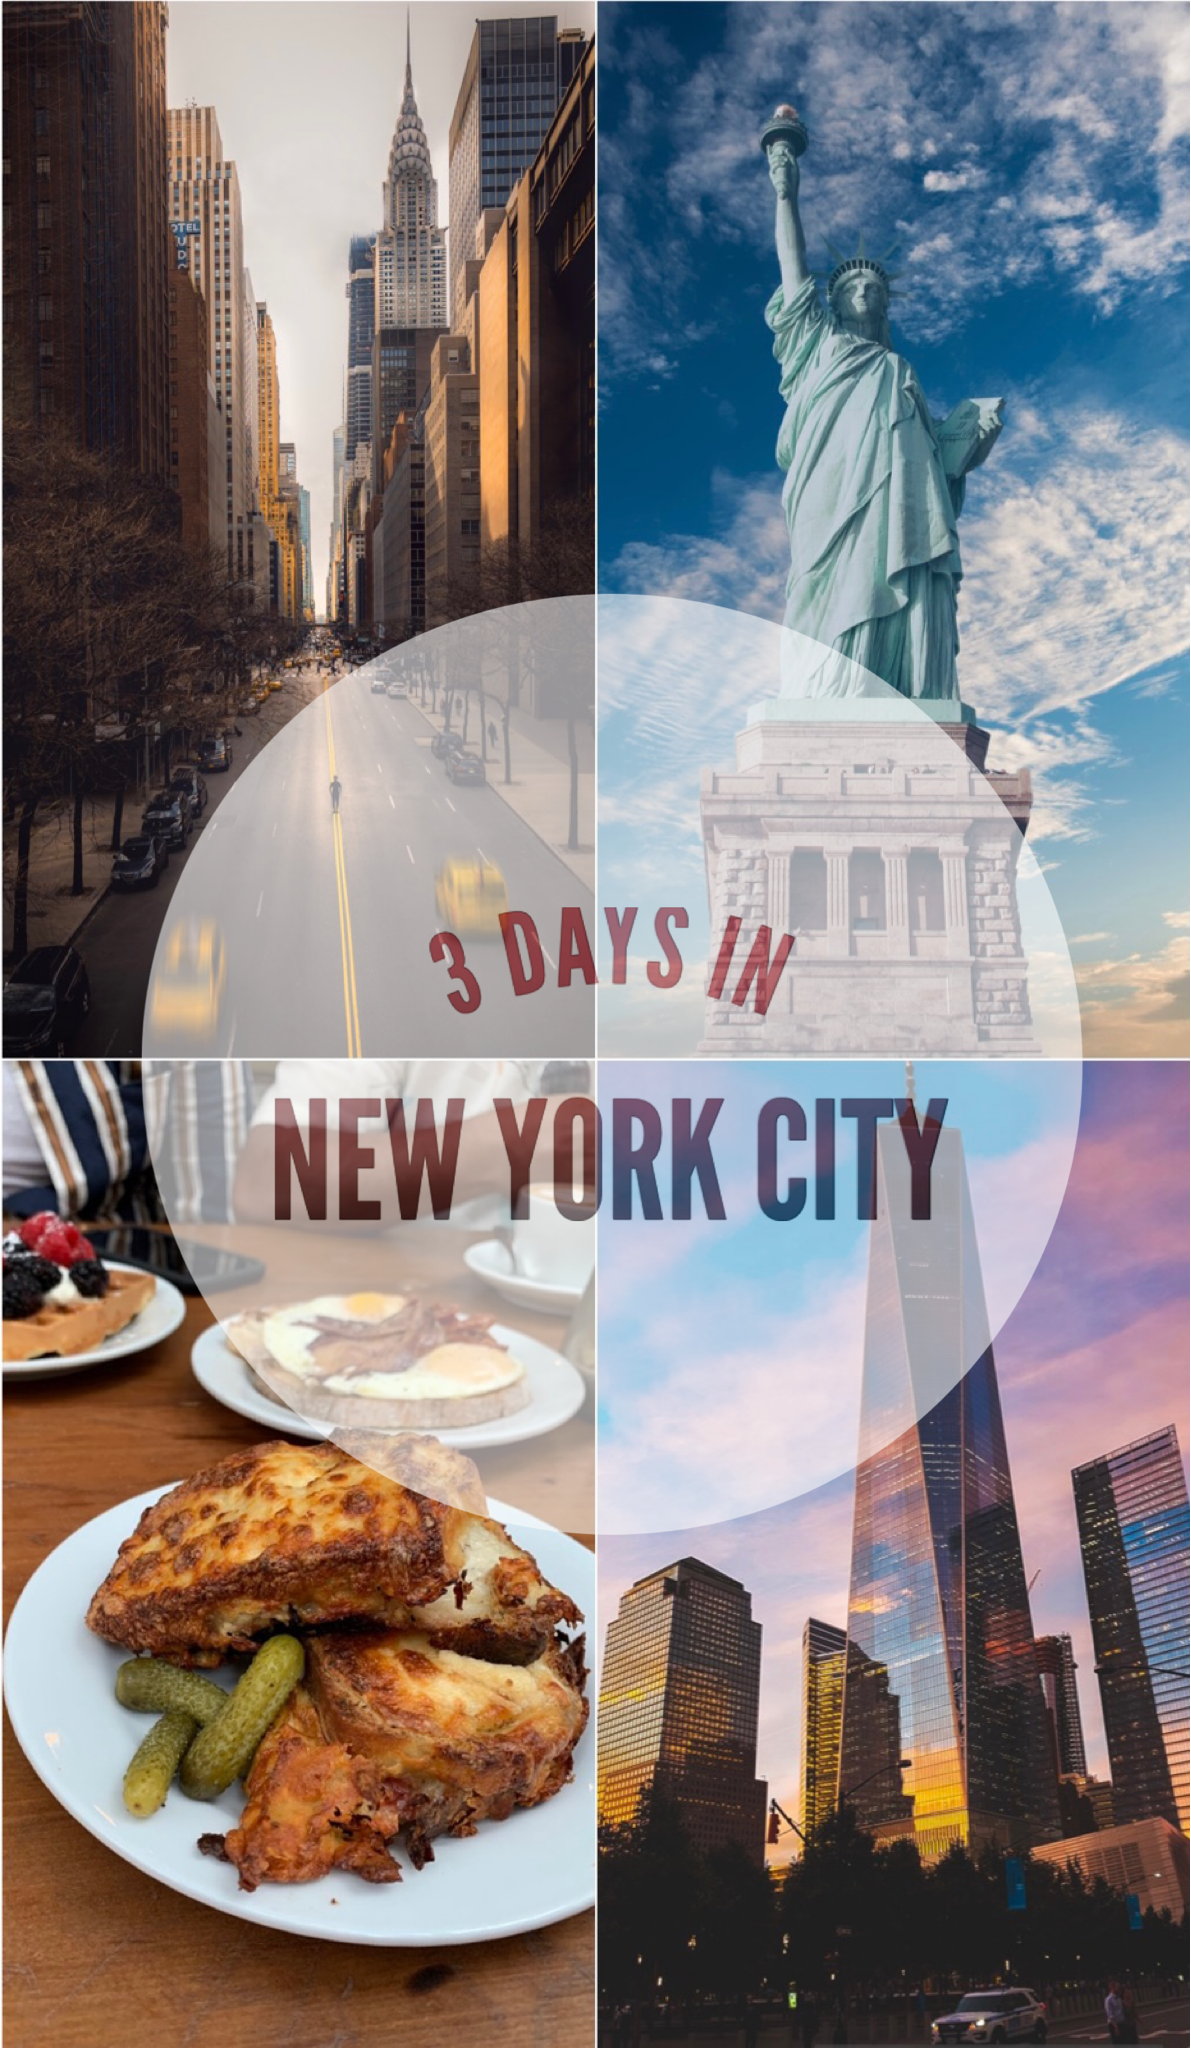 NYC Travel & City Guide, Restaurants, Shopping & Things to Do